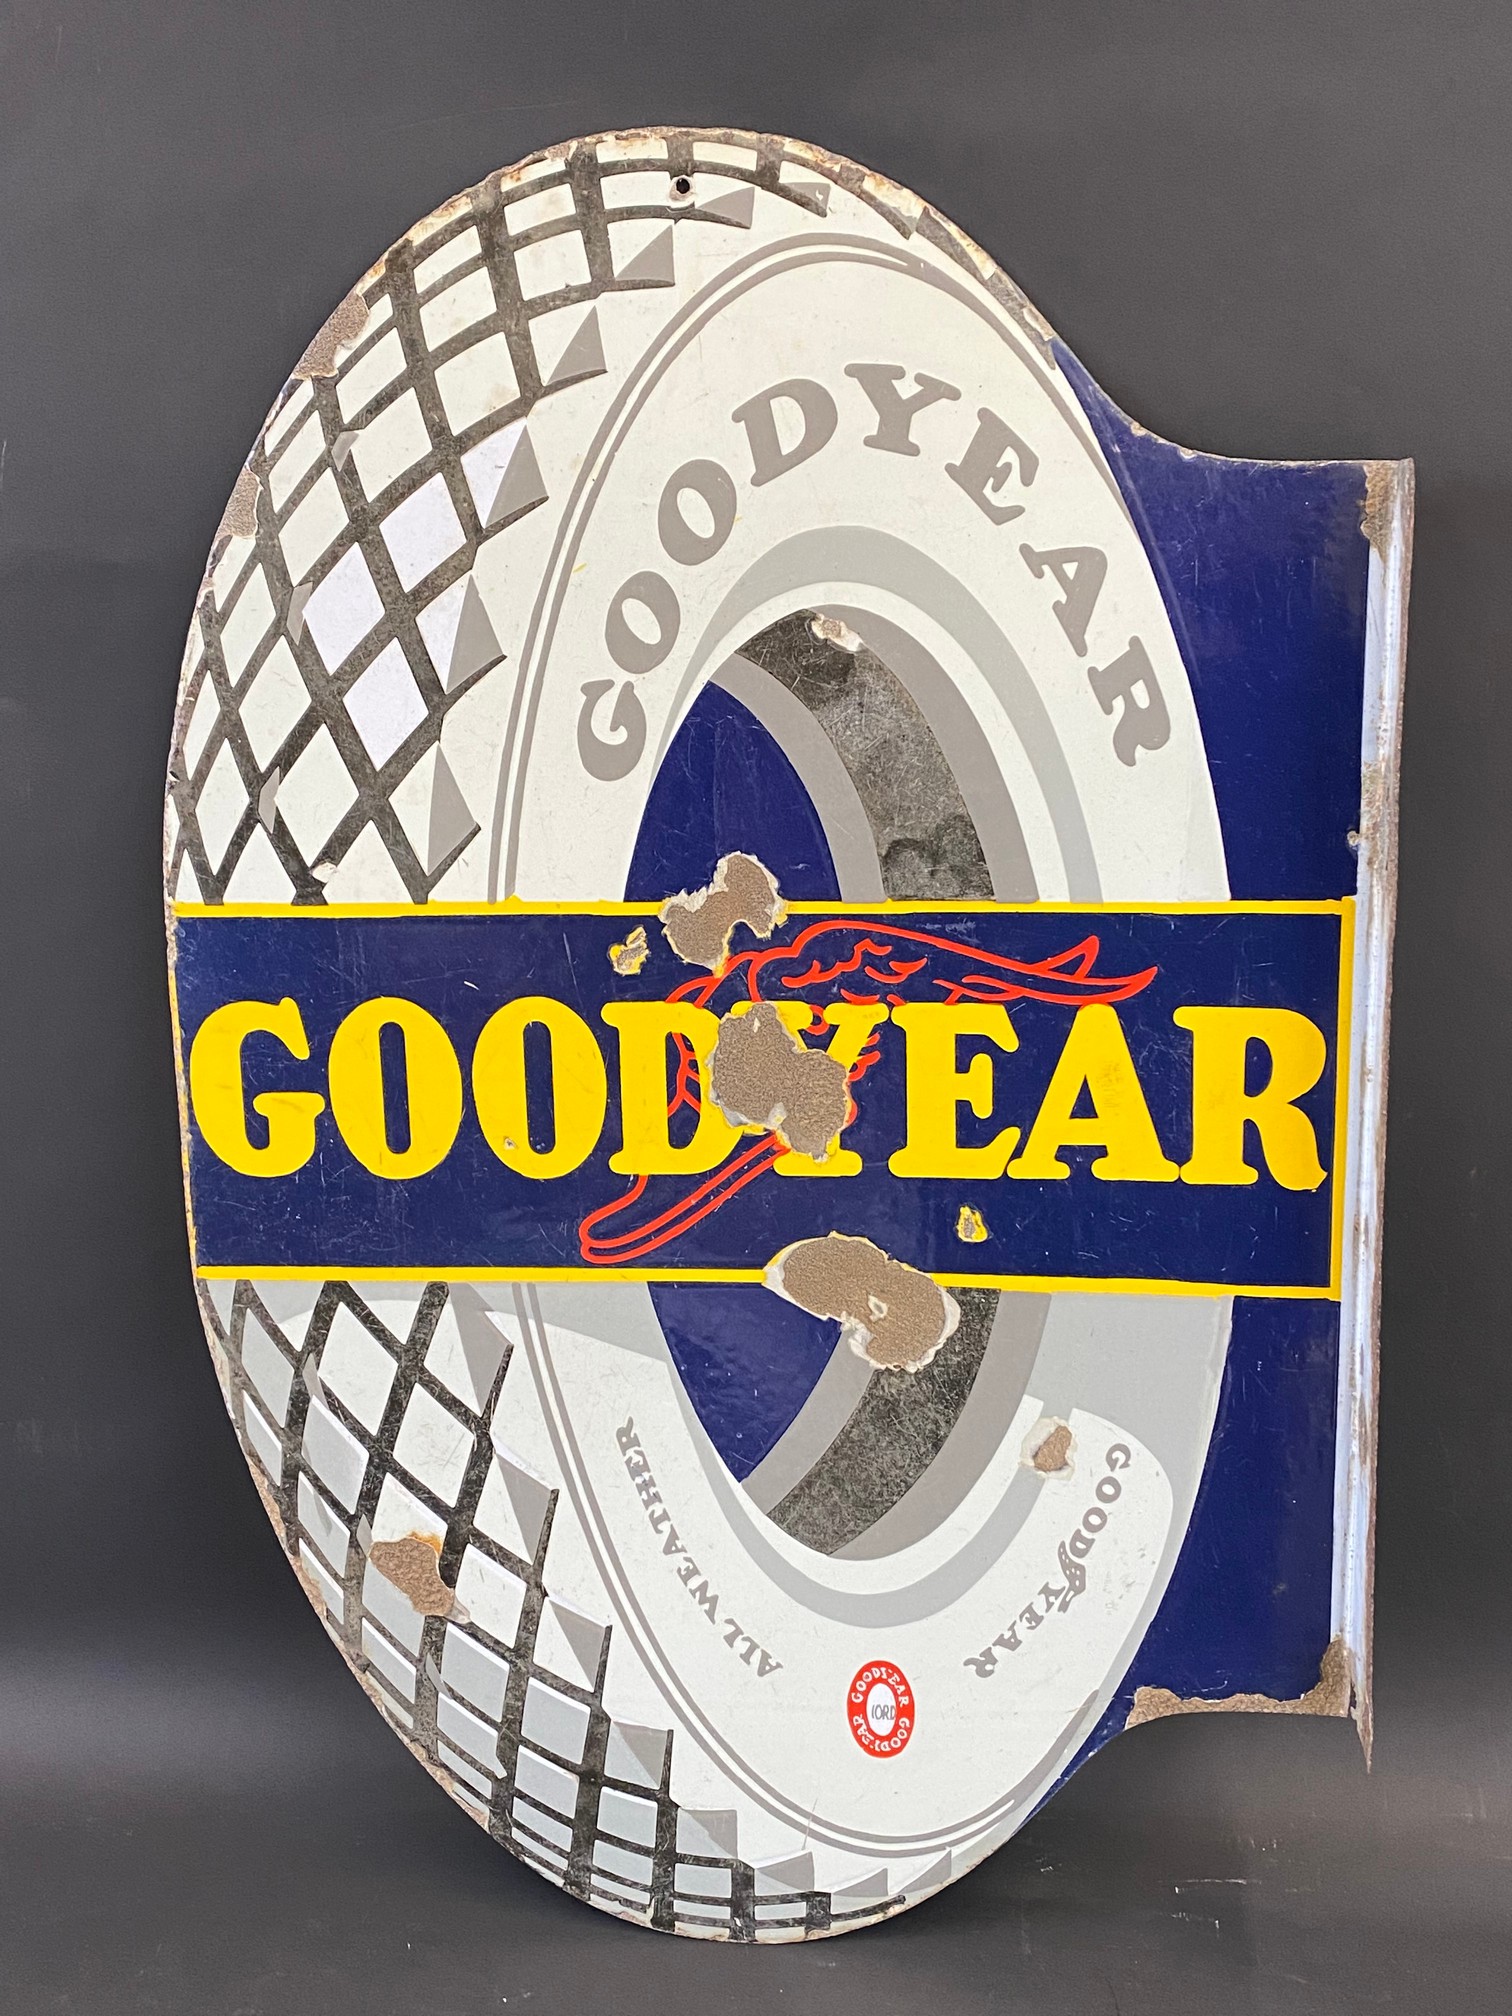 A Continental Goodyear tyre-shaped double sided enamel sign with hanging flange, 22 x 34".